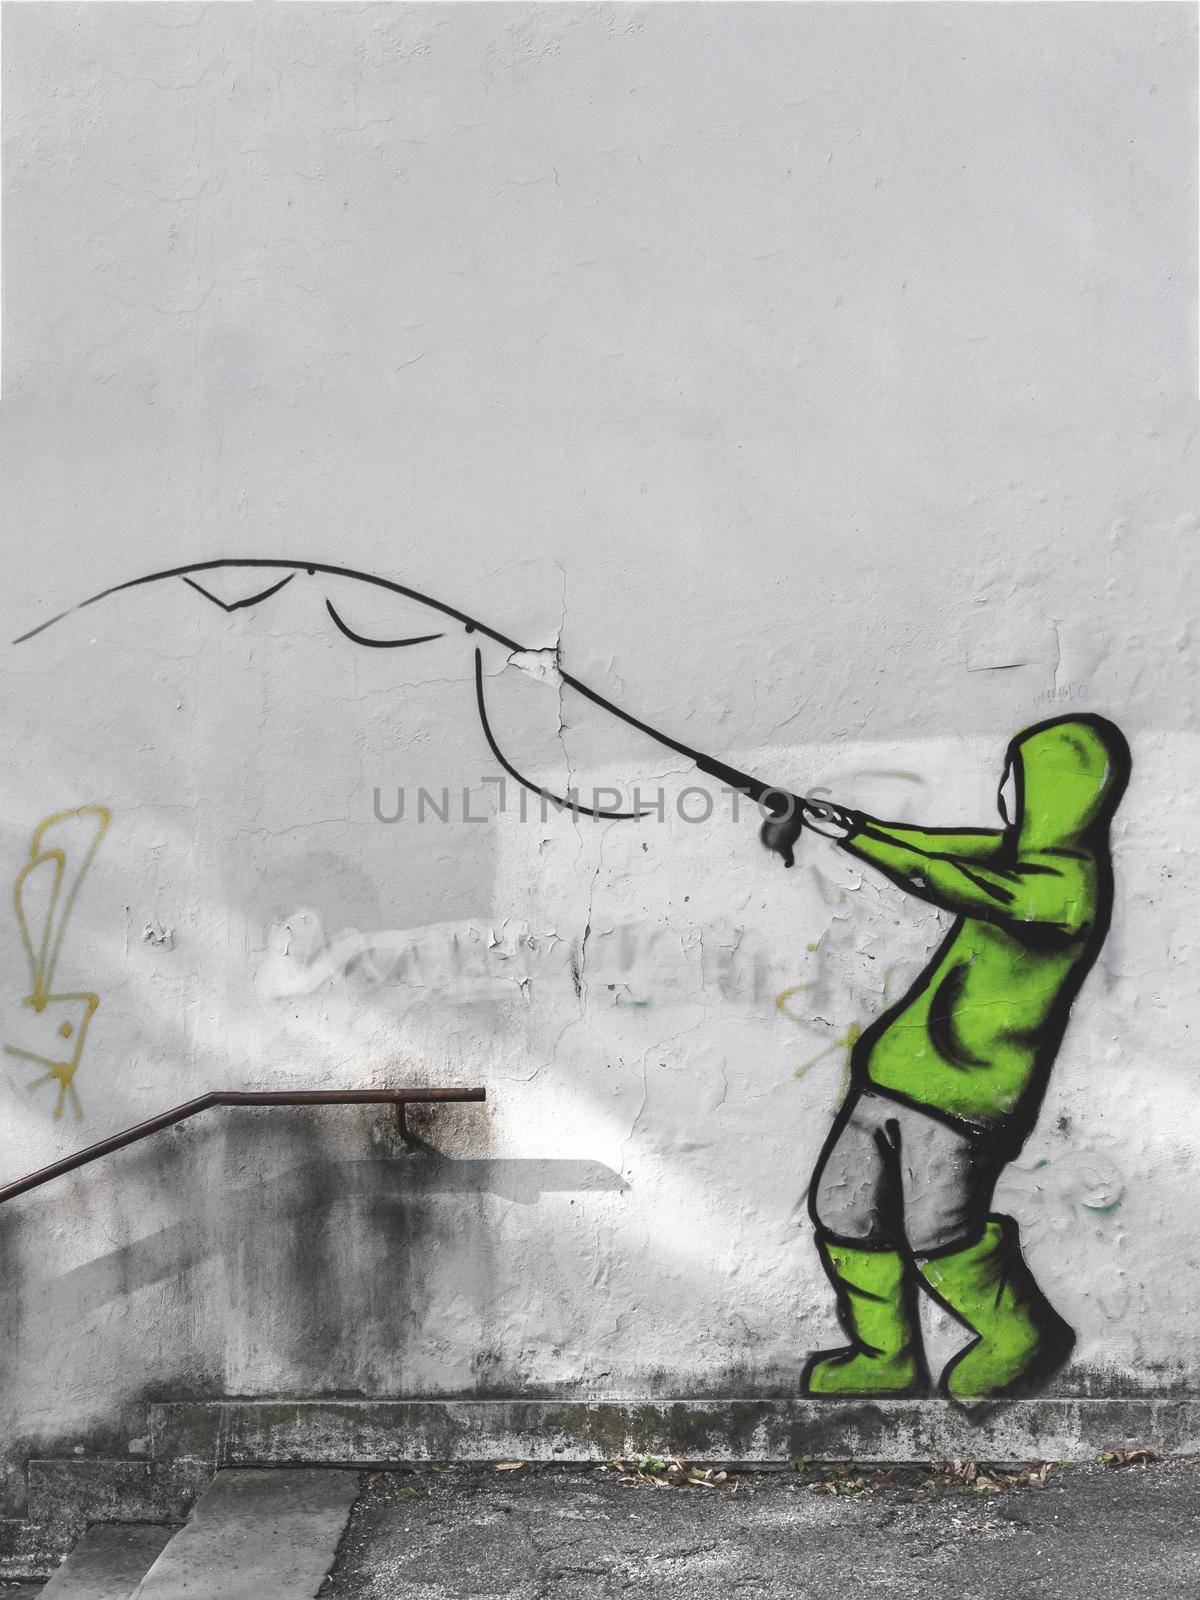 Street art by unknown artist on a concrete wall. The painting represents a boy fishing, suit with raincoat and green galoshes. Vertical copy space.